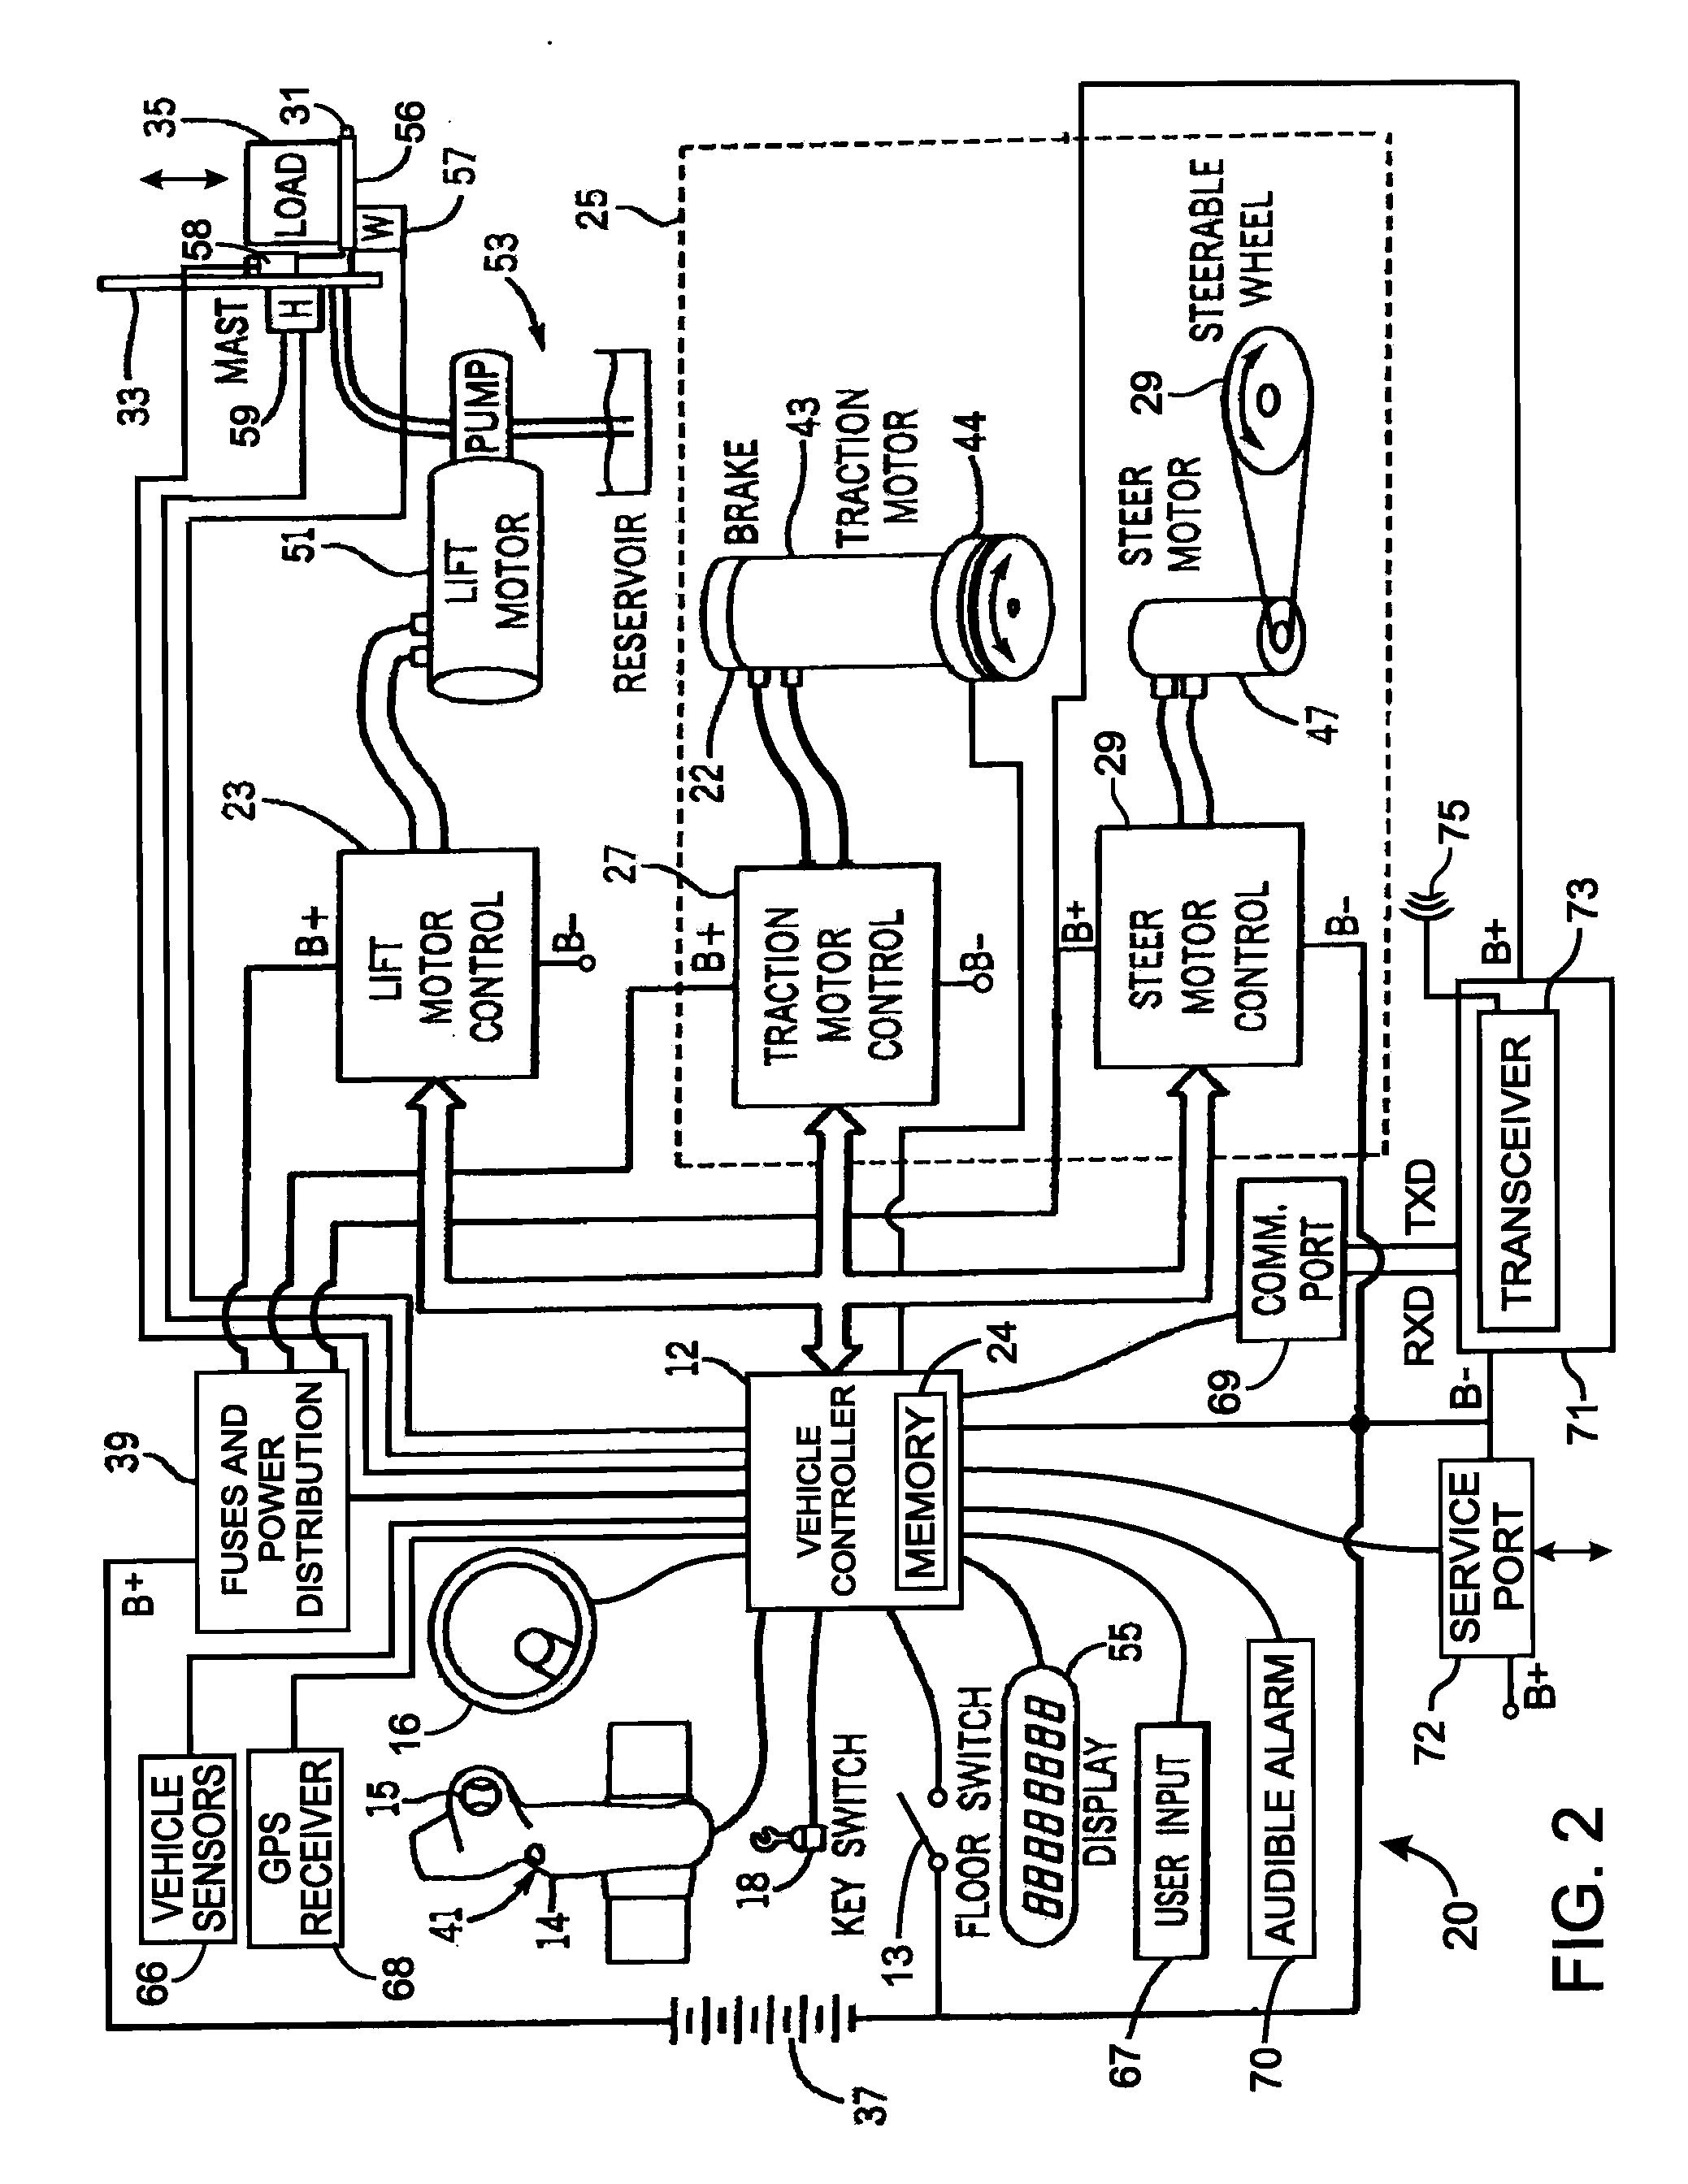 System for managing operation of industrial vehicles